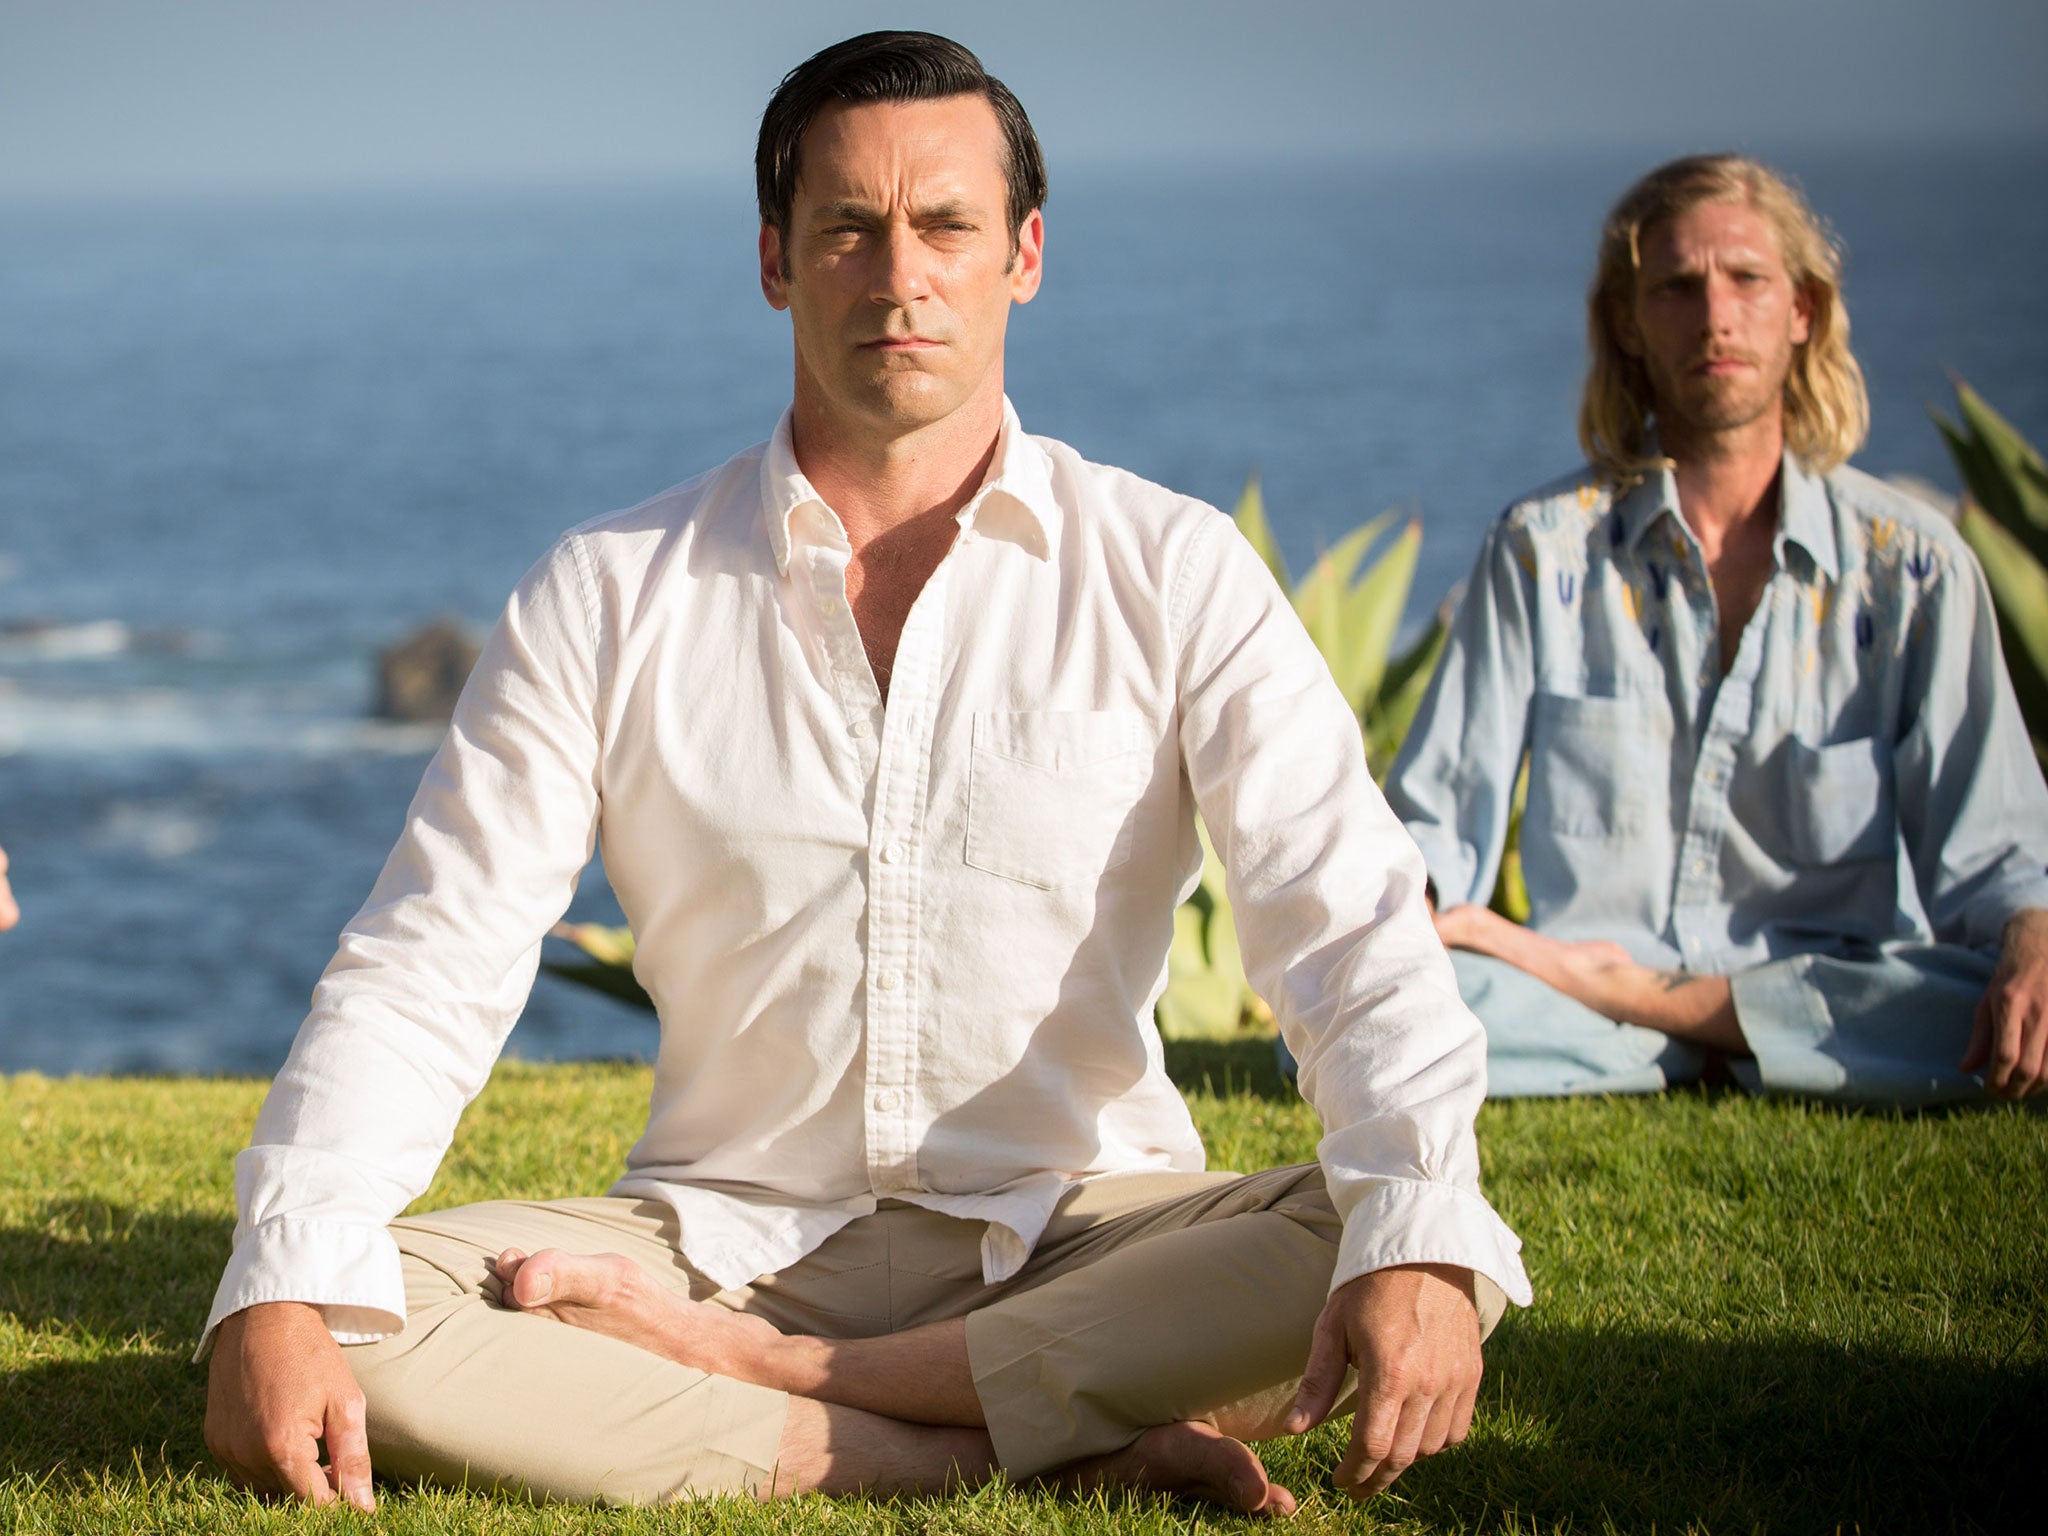 Jon Hamm’s Don Draper searches for enlightenment in the final ‘Mad Men’